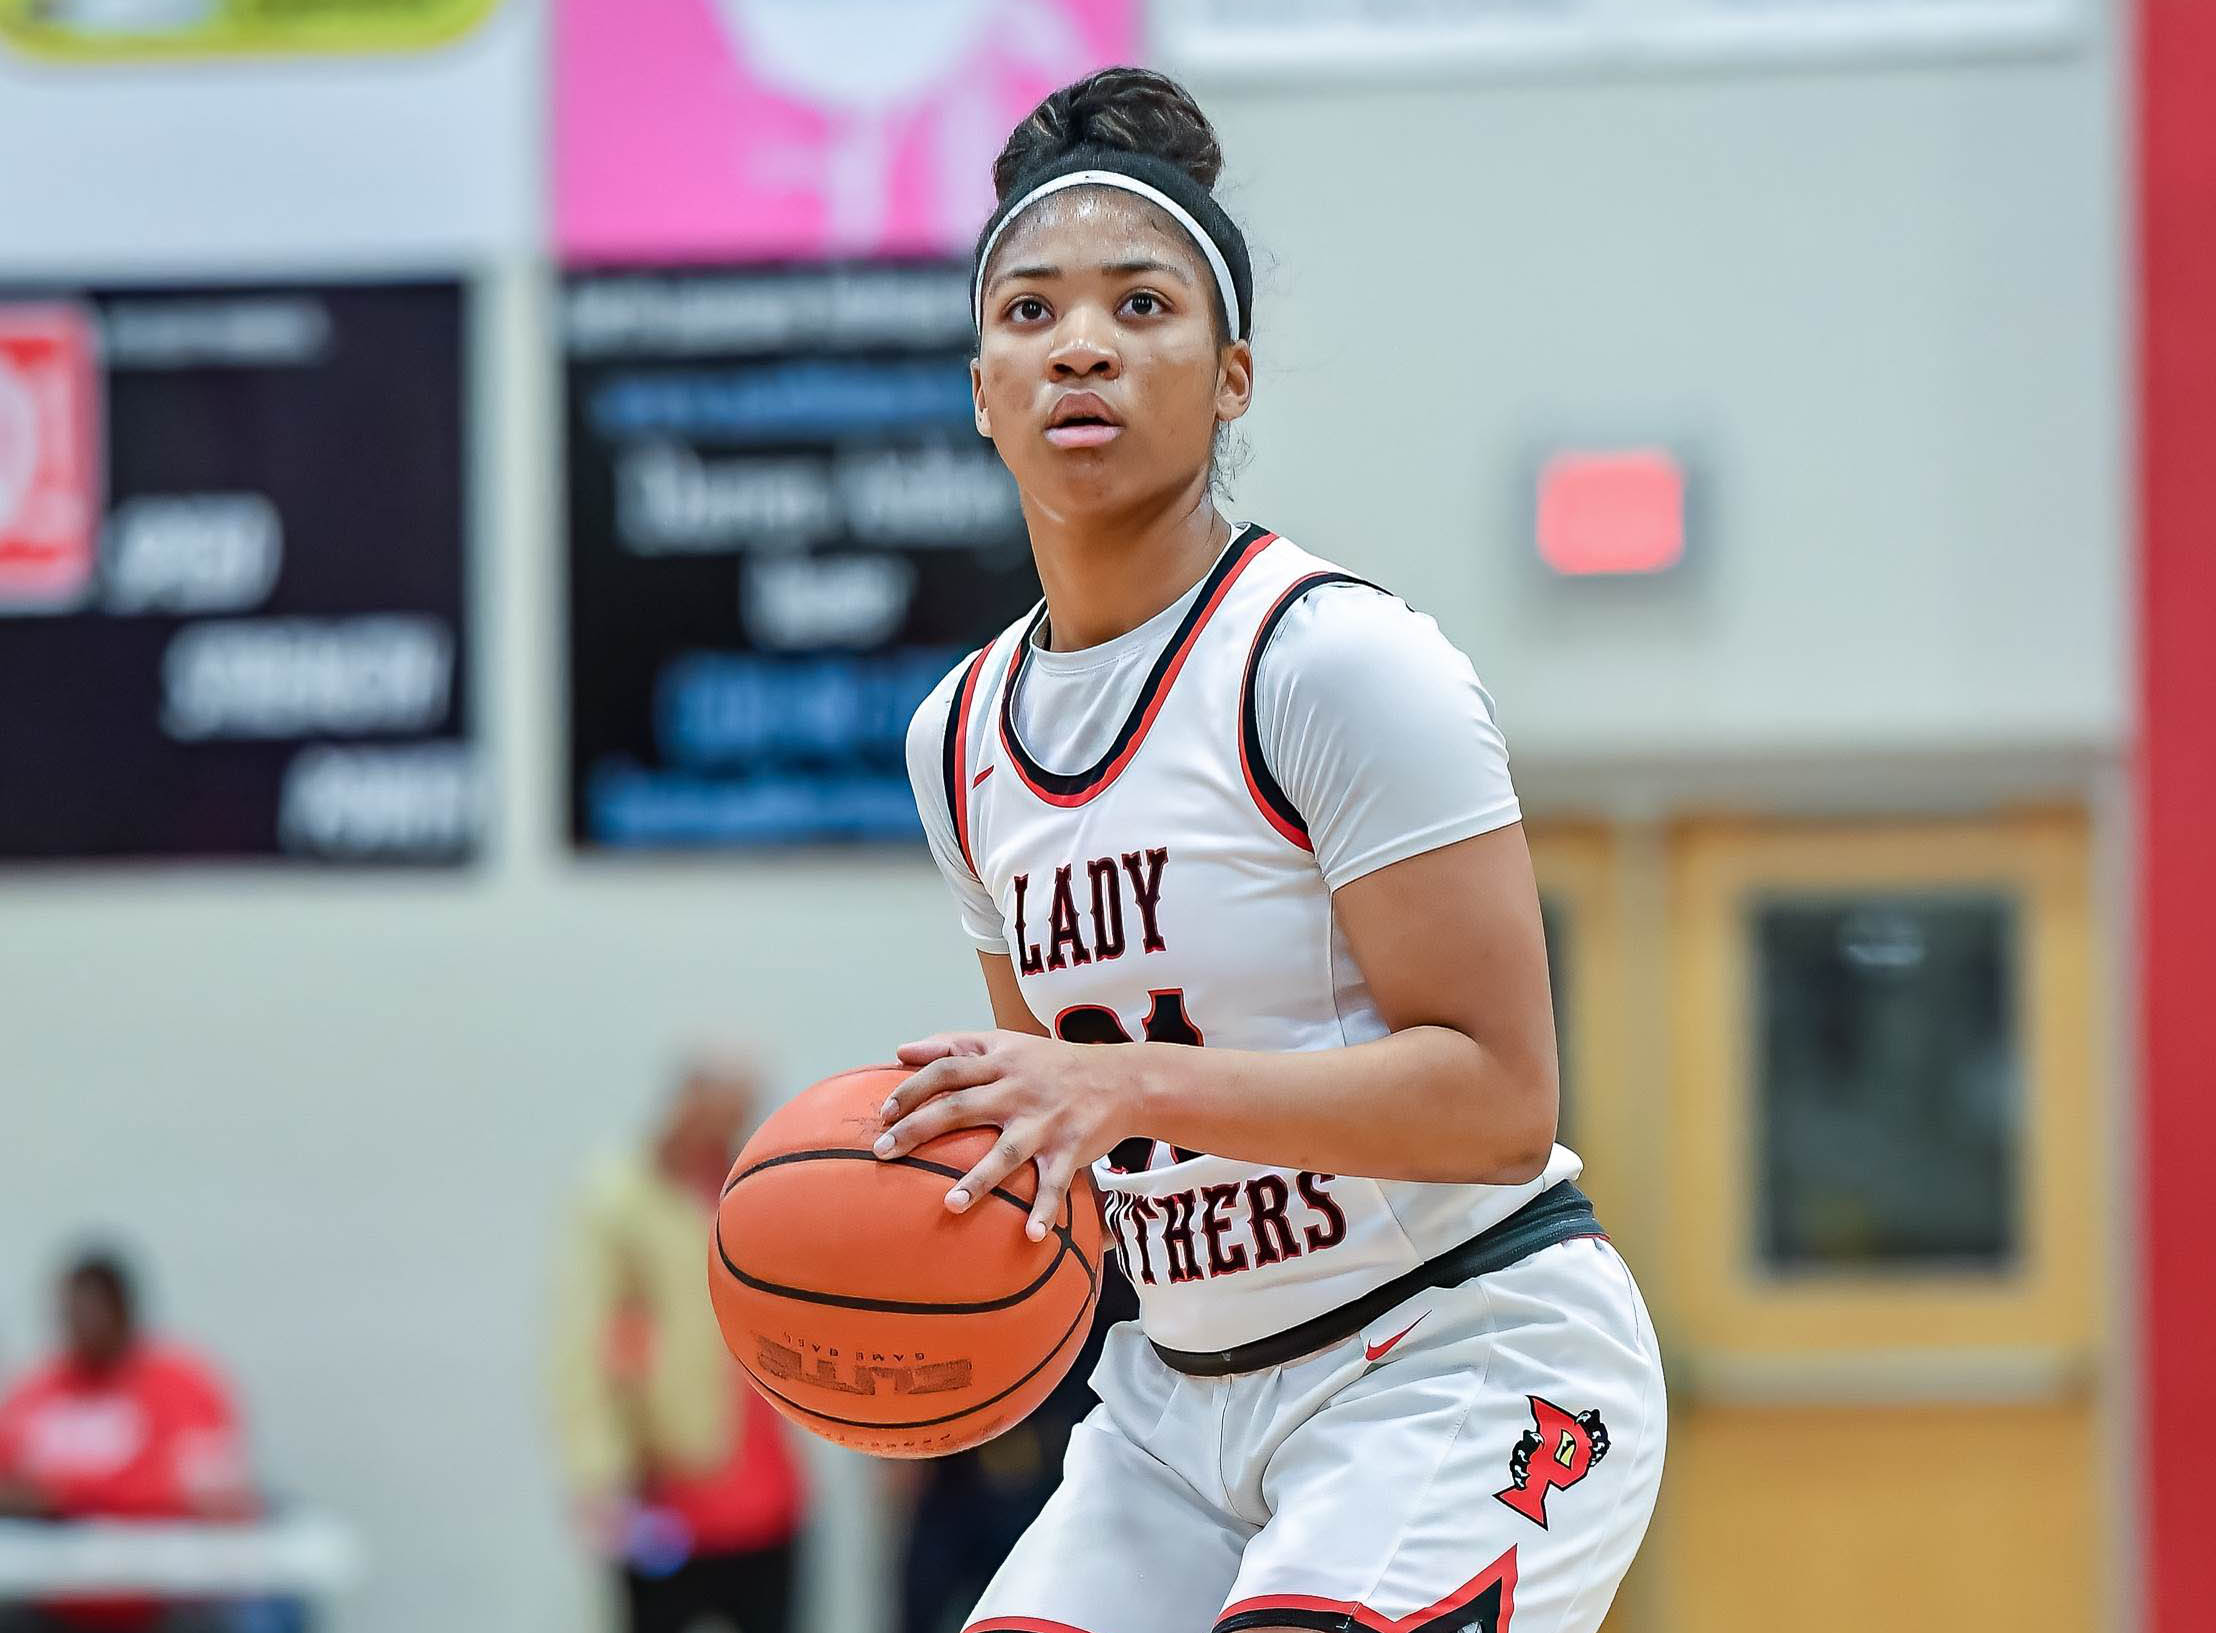 Chloe Larry of Parkway lifted the Panthers to the Louisiana Division I Non-Select championship game with a buzzer-beating, half-court game winner on Thursday. The last-second shot lifted Parkway to a 64-63 win over top-seeded Walker. (Photo: Wayne Grubbs)